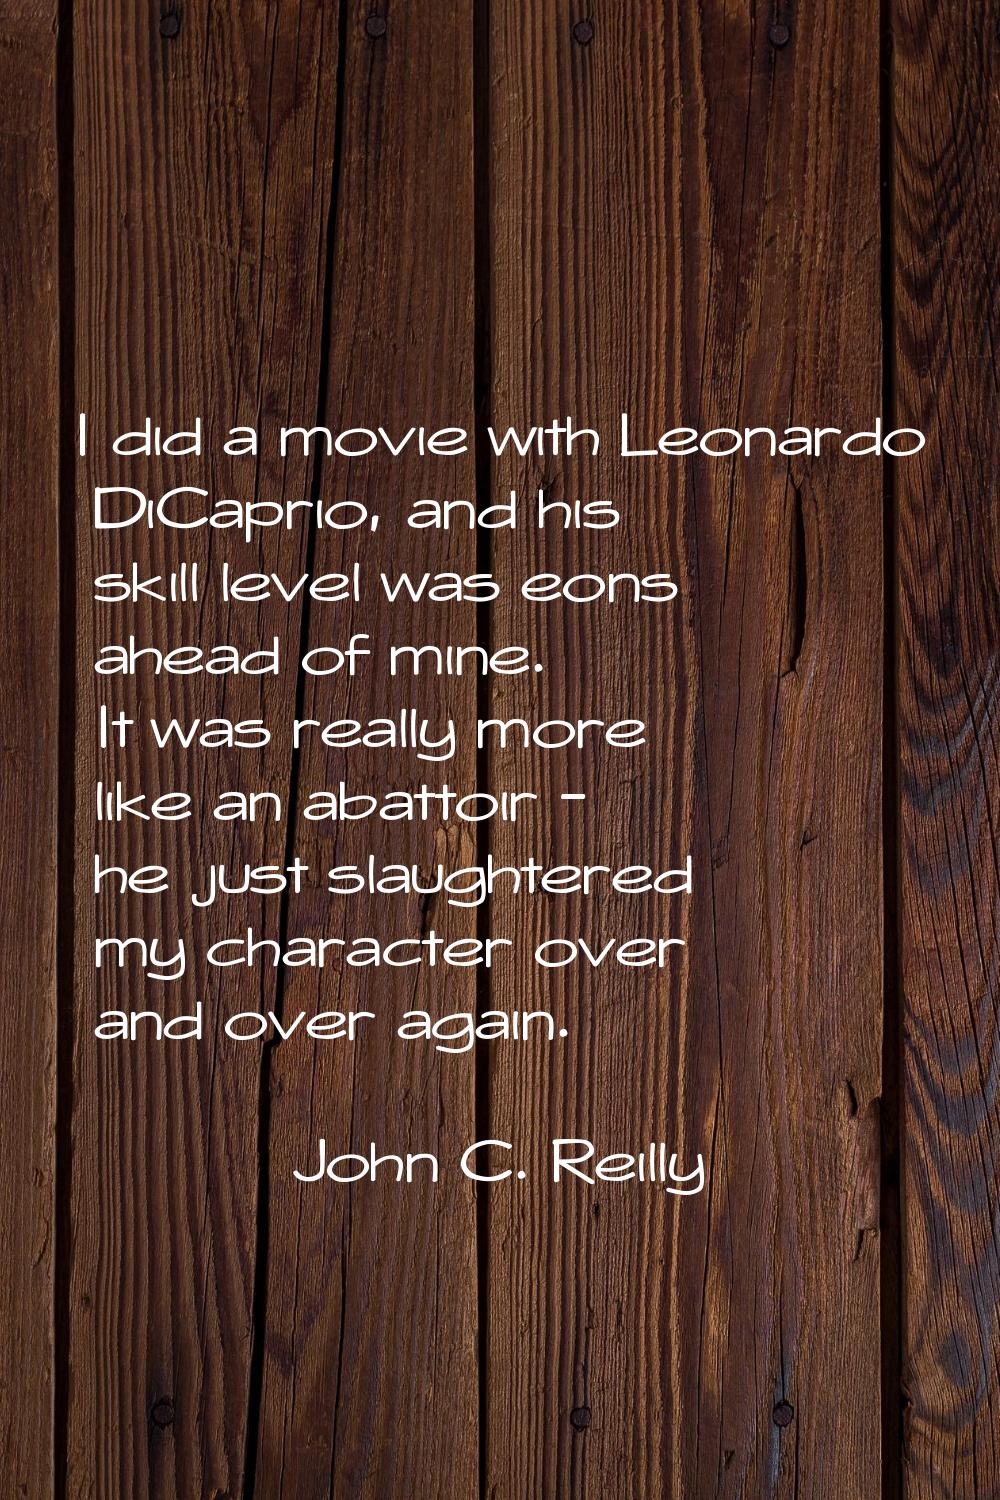 I did a movie with Leonardo DiCaprio, and his skill level was eons ahead of mine. It was really mor